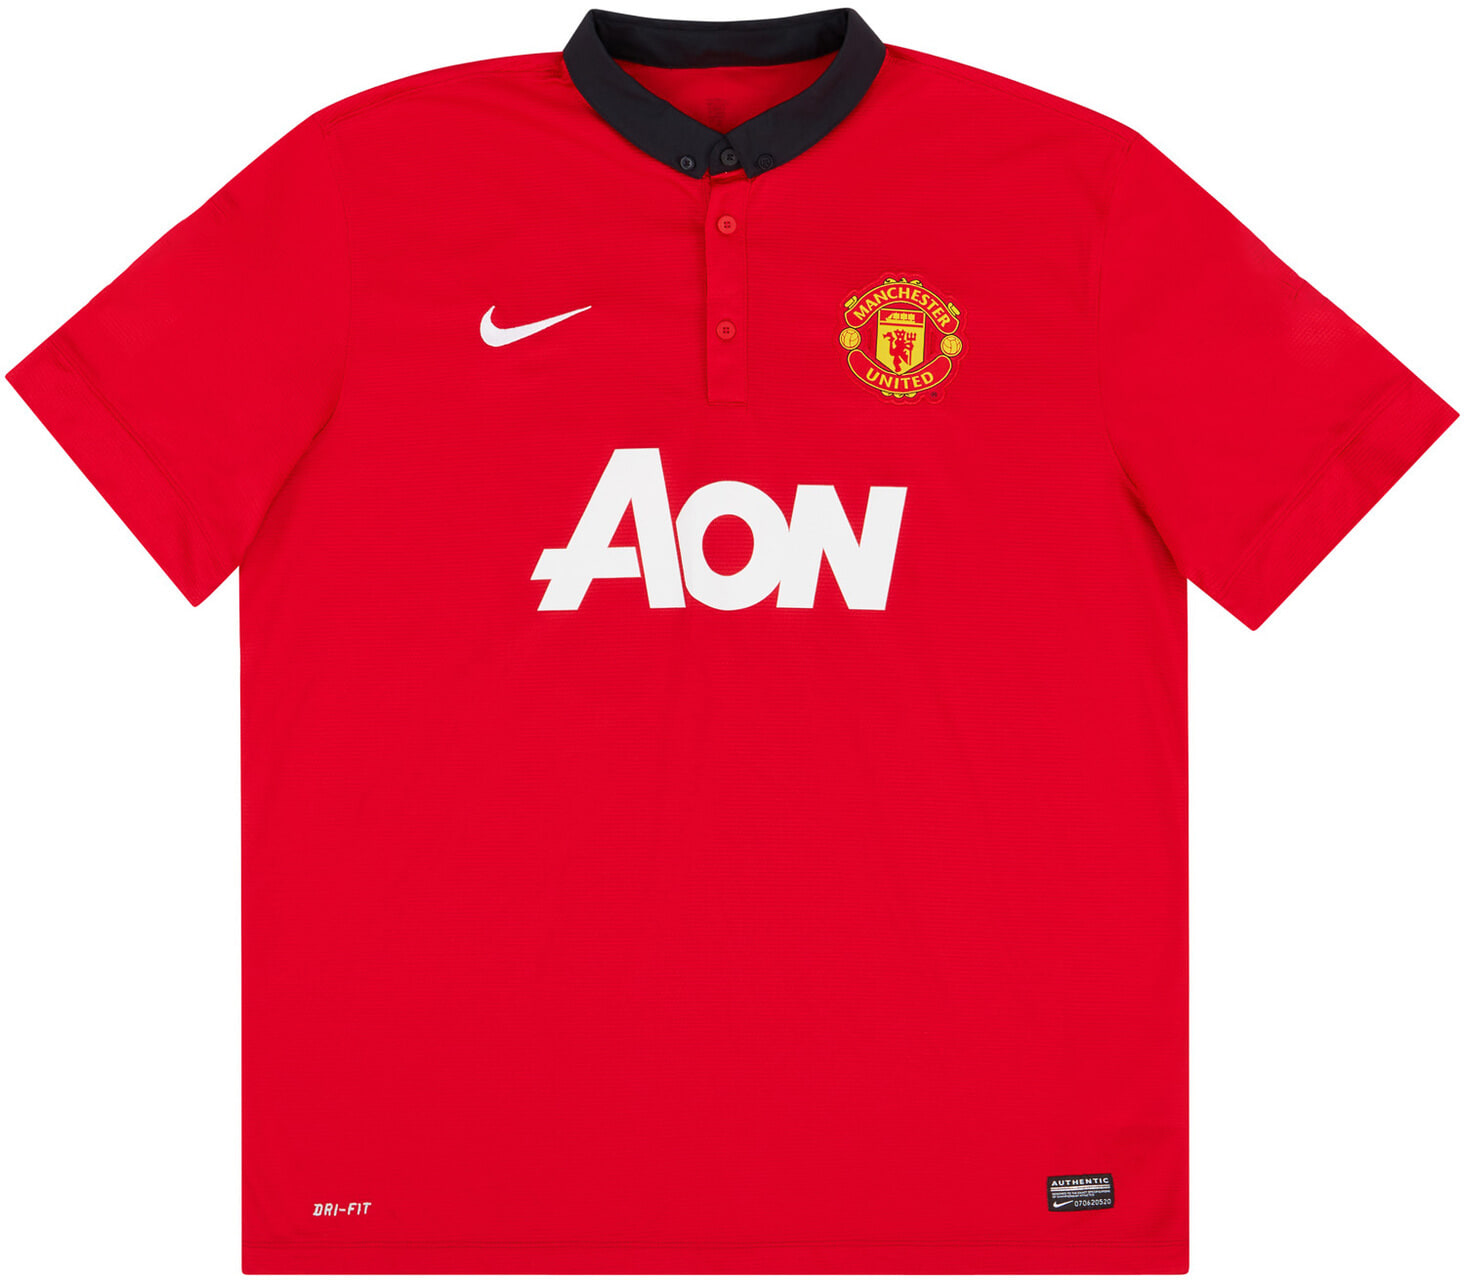 2013-14 Manchester United Home Shirt - 8/10 -